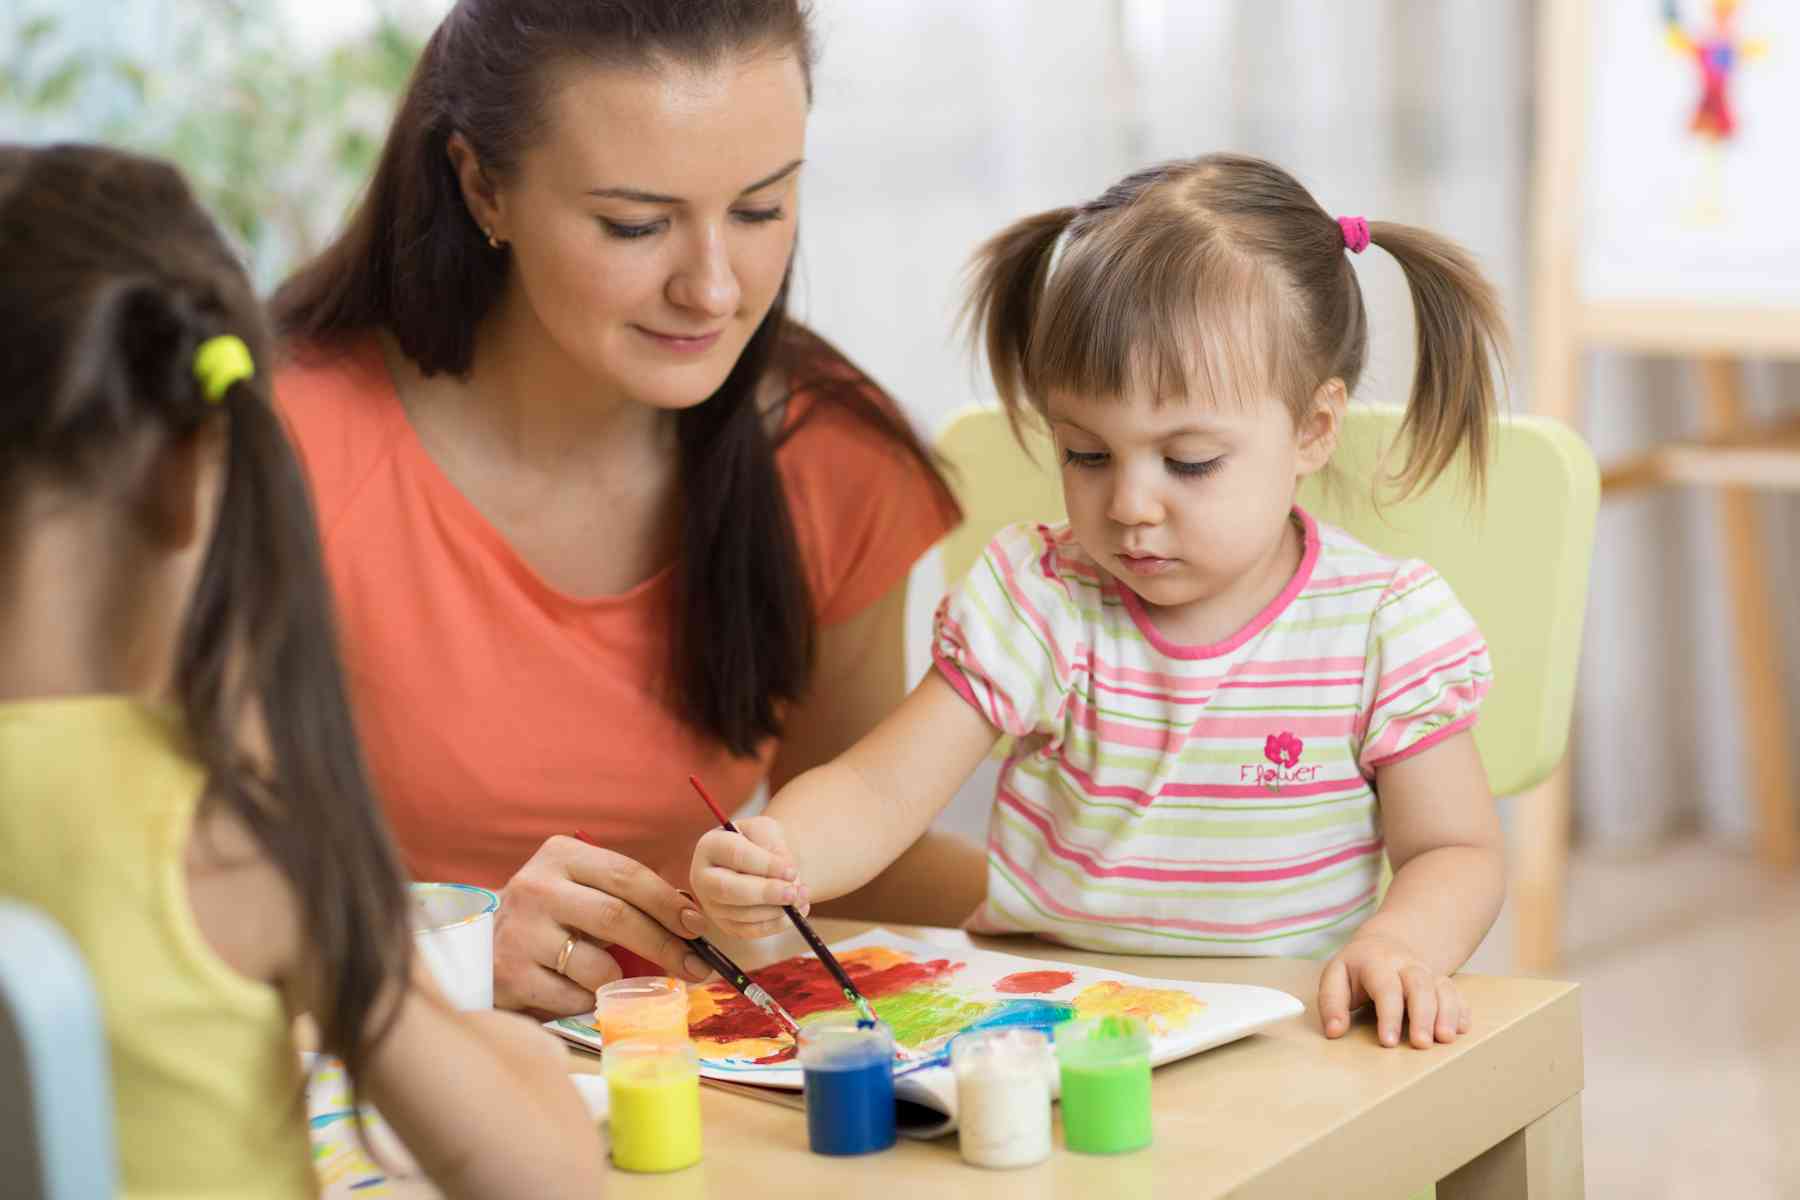 Low-paid 'women's work': why early childhood educators are walking out